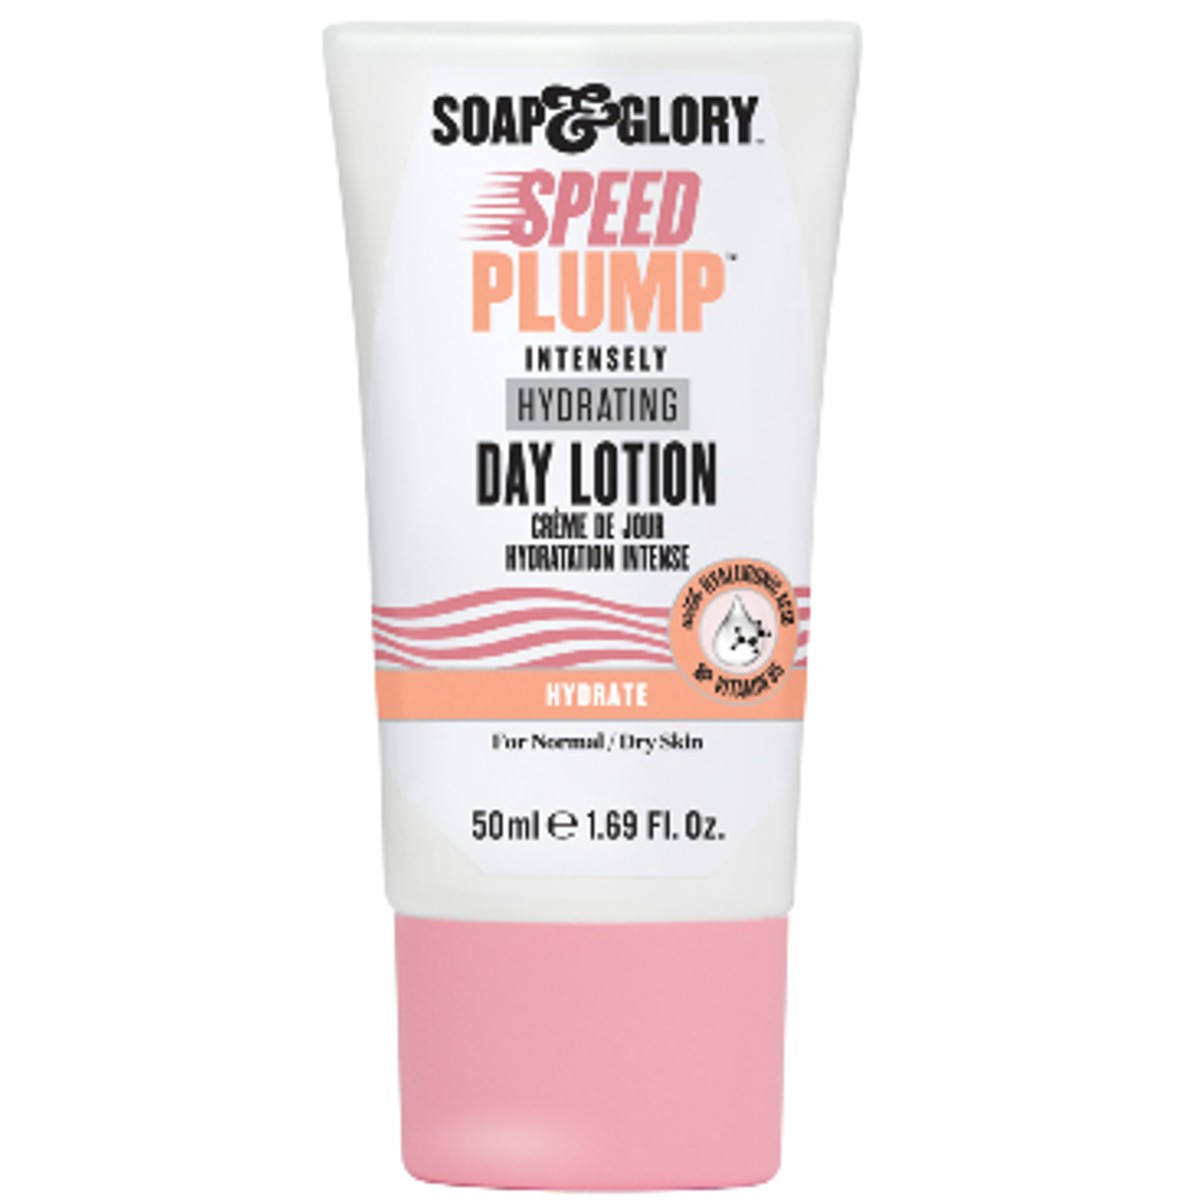 Speed Plump Intensely Hydrating Day Lotion Moisturiser